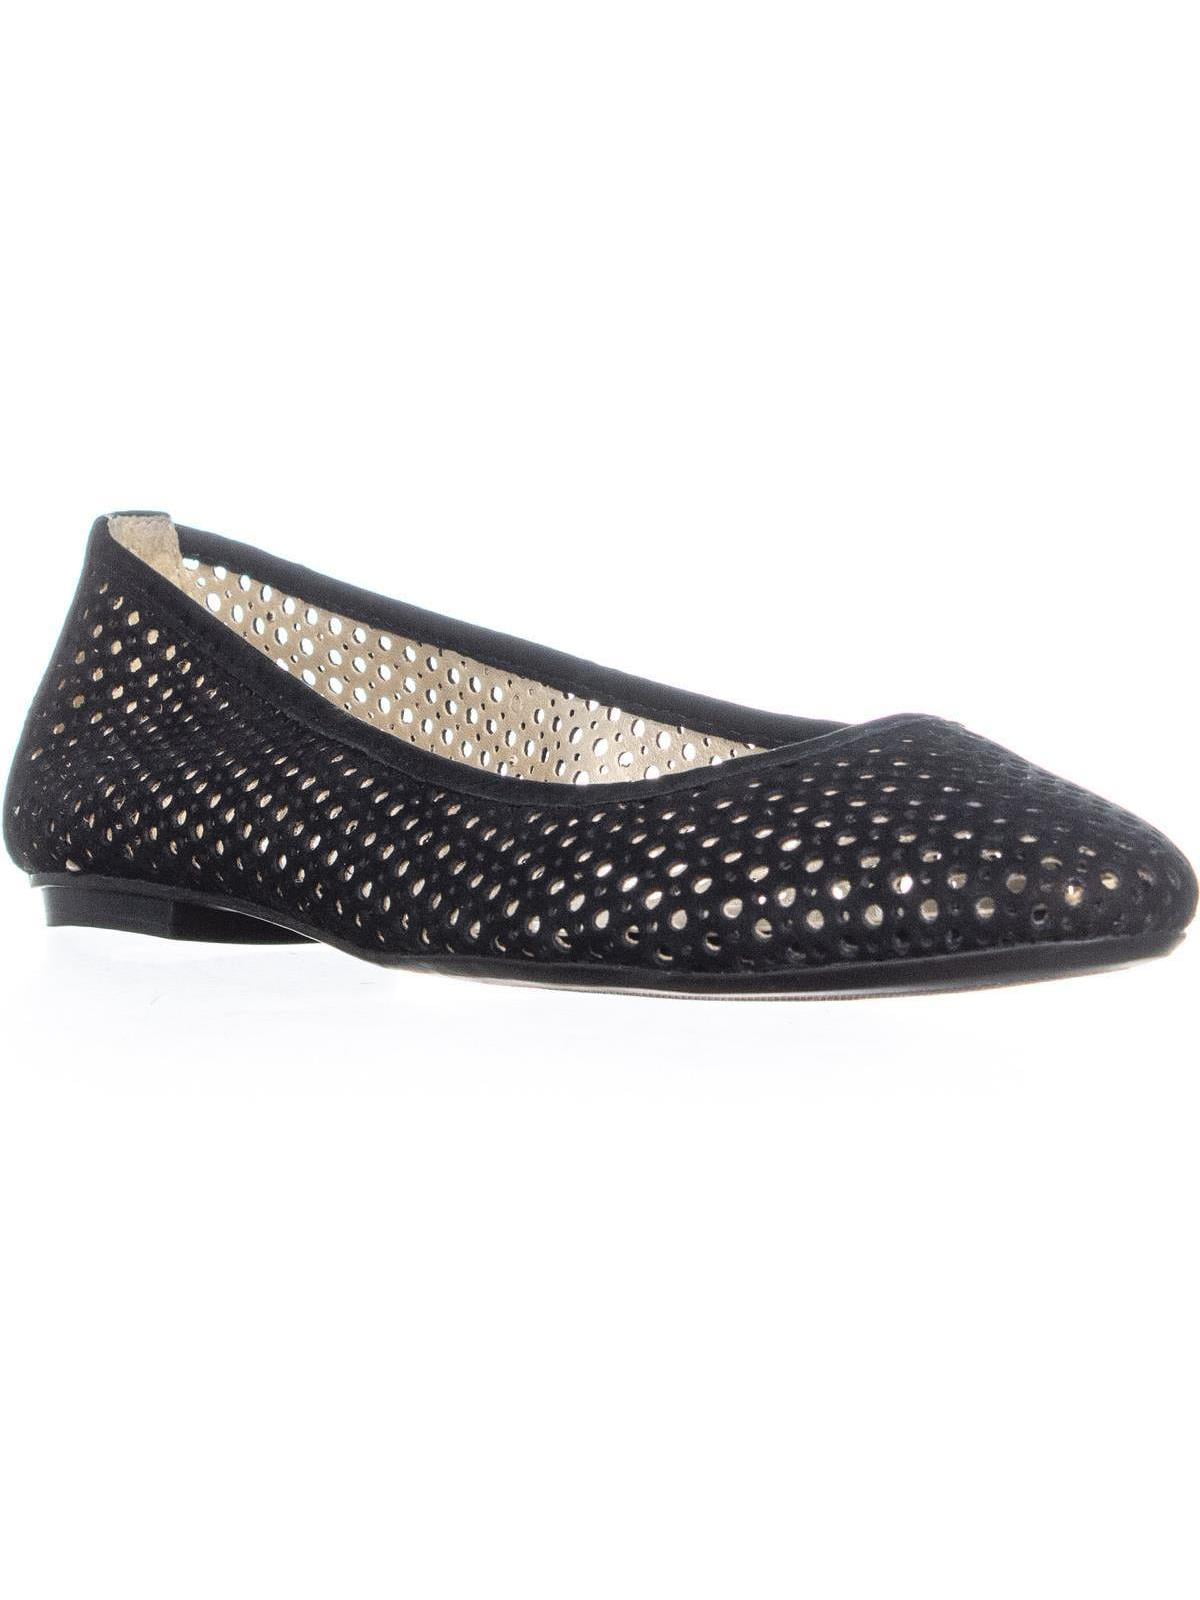 Womens French Sole League Perforated Ballet Flats, Black - Walmart.com